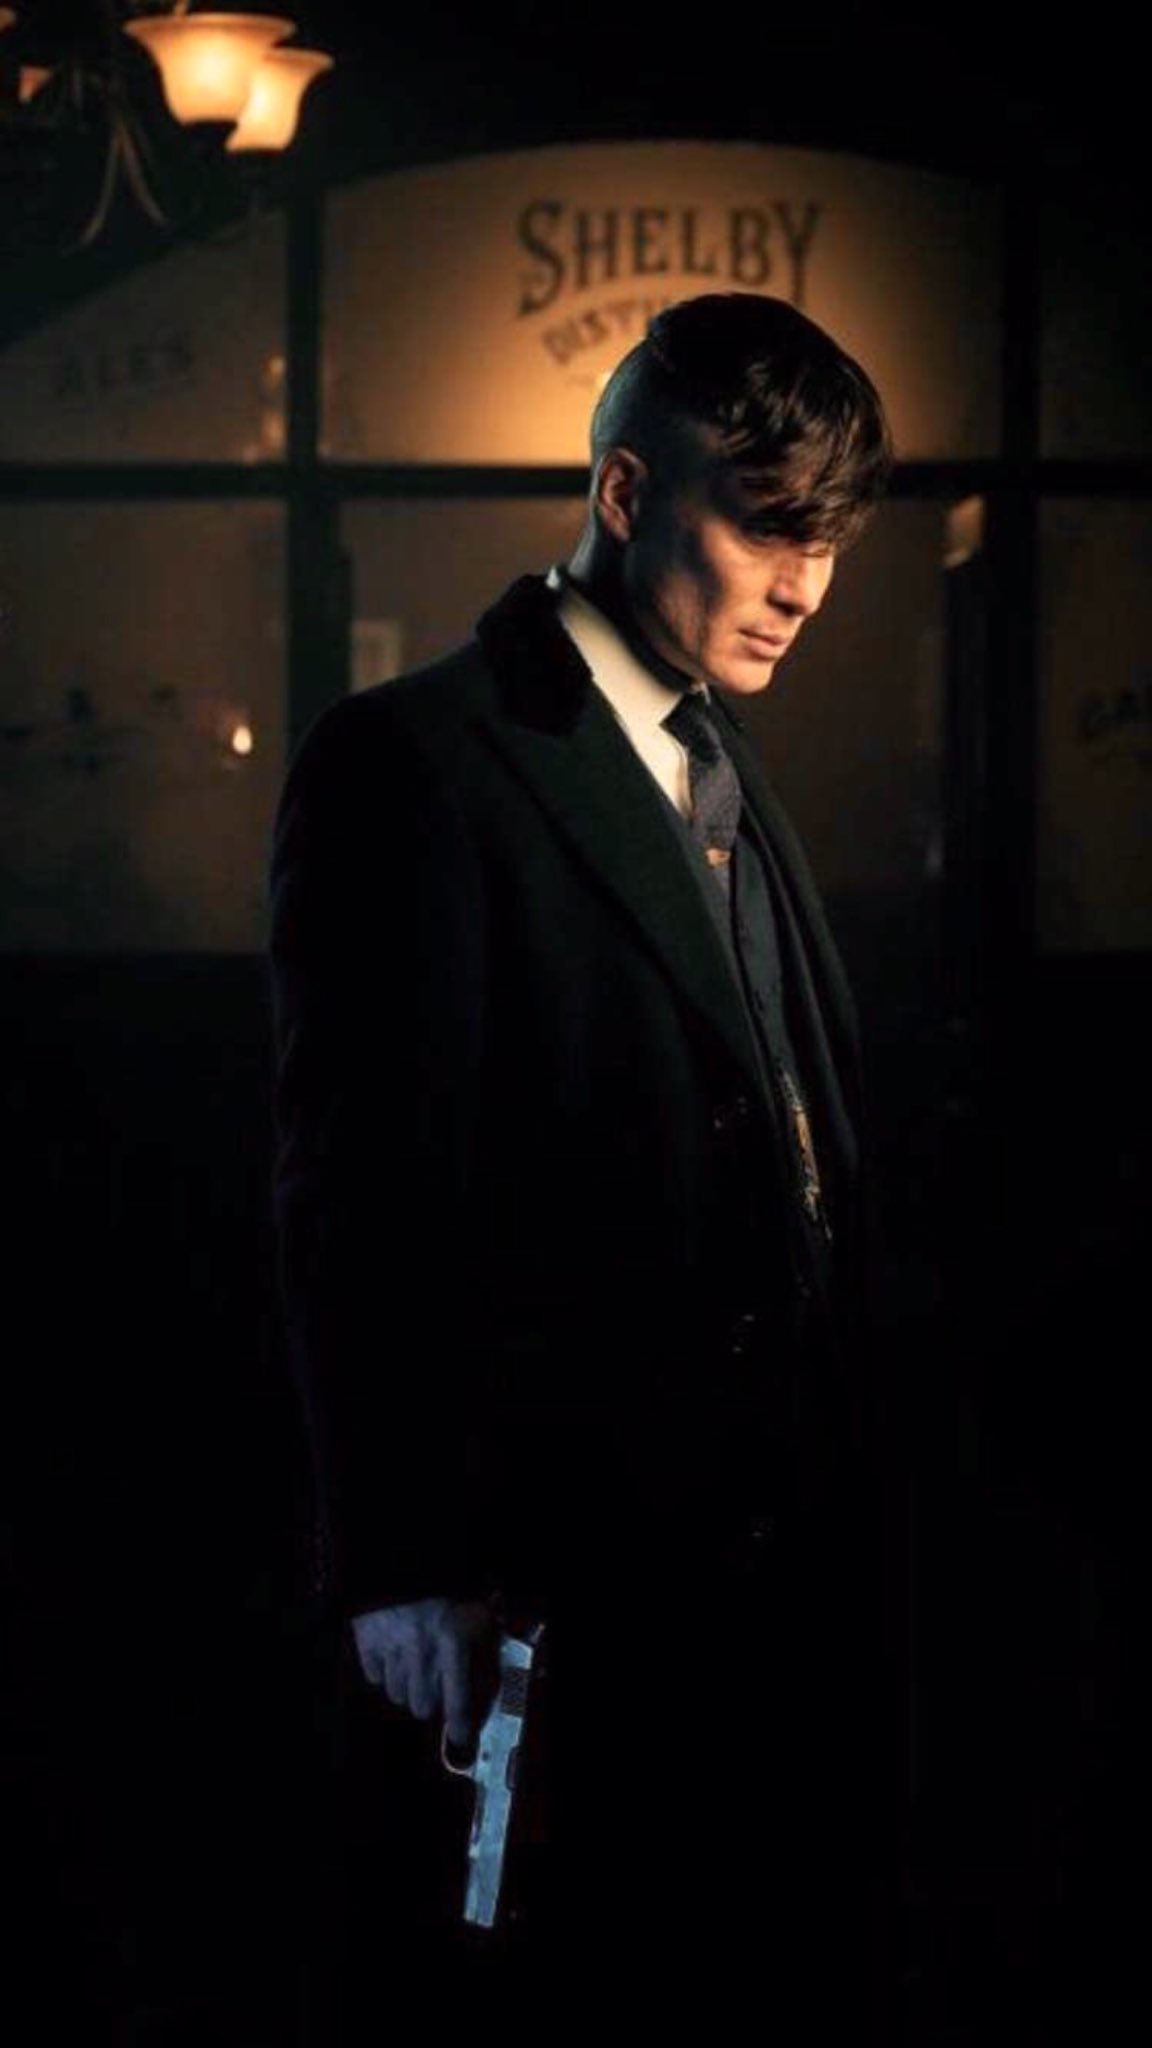 Phone Wallpaper Shelby #ThomasShelby #PeakyBlinders